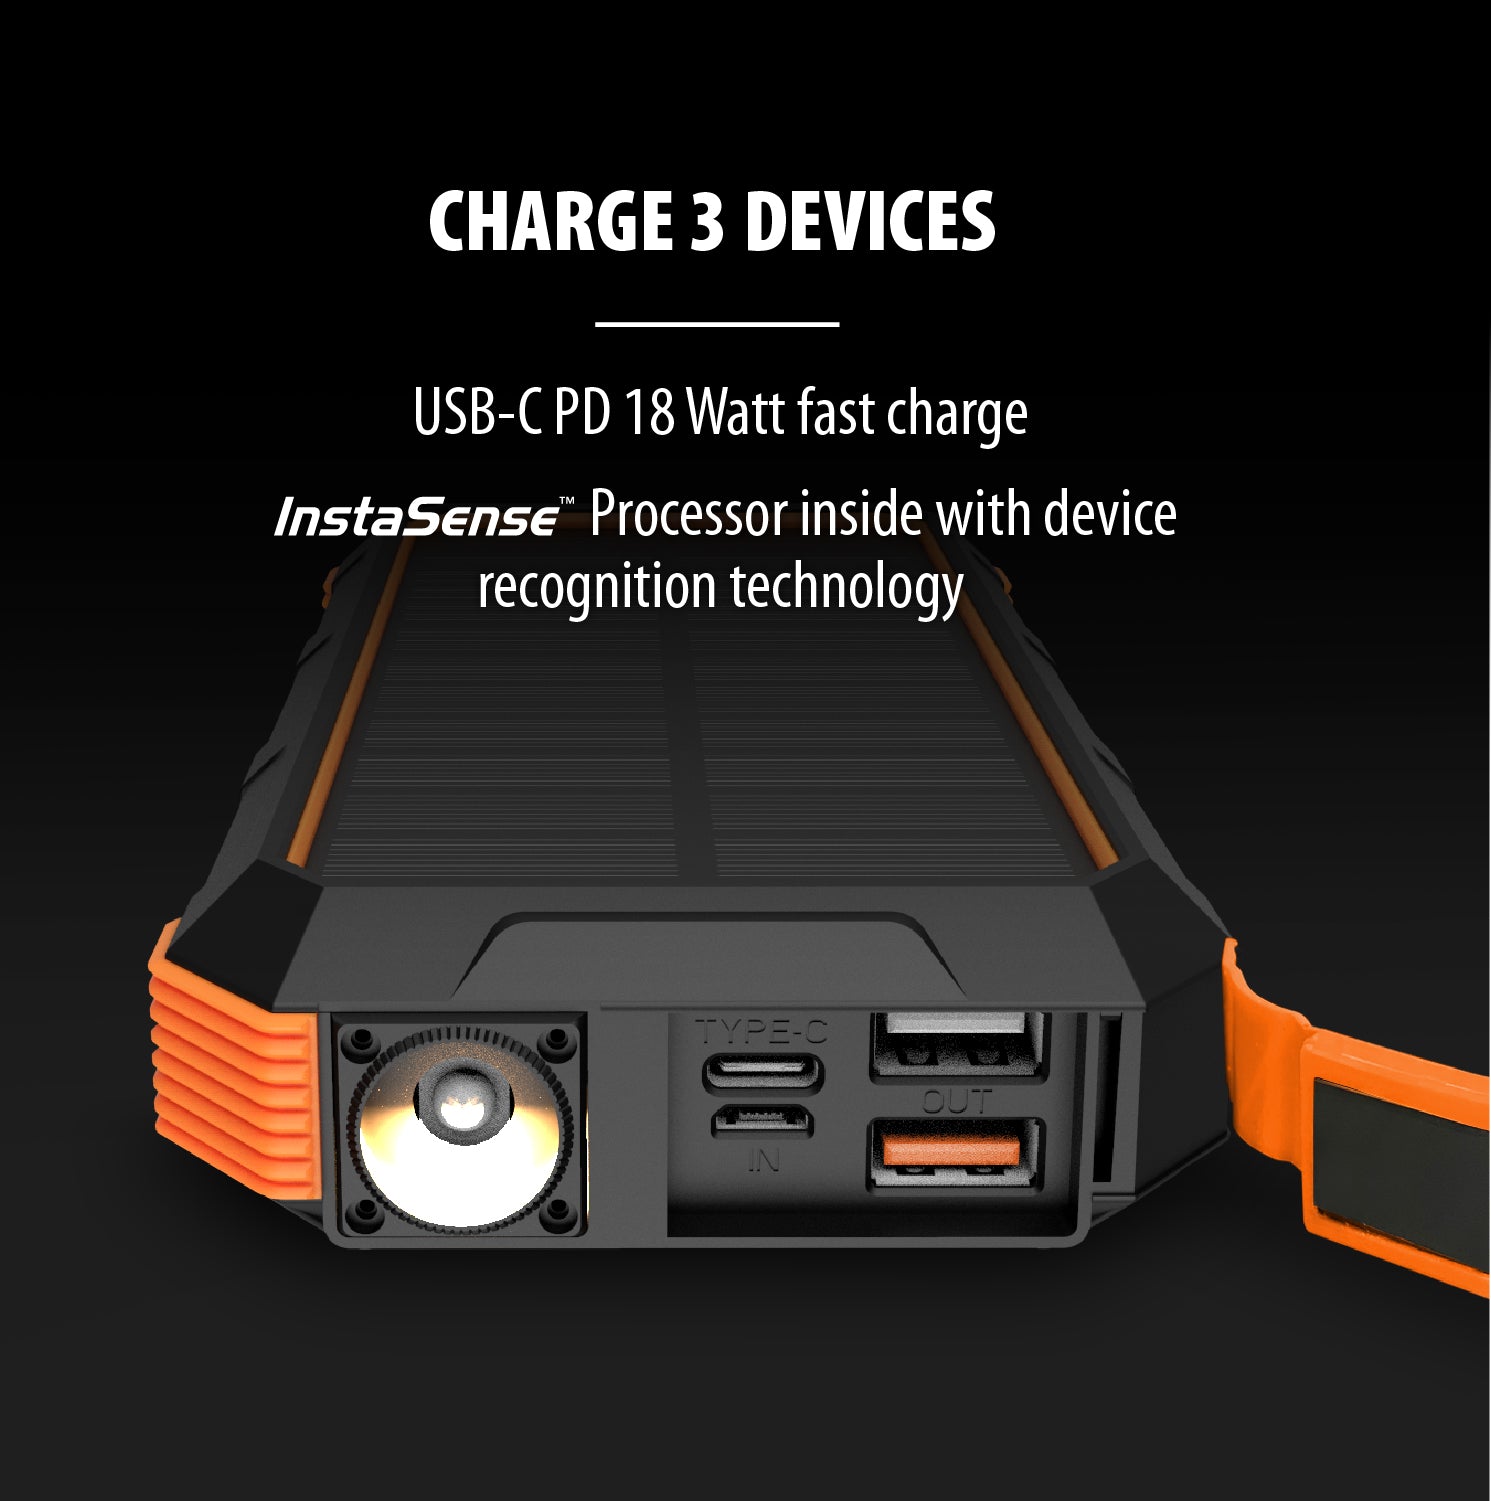 SOLAR  ROC24 24,000 mAh Powerbank with Wireless Charging & Power Delivery Fast Charging